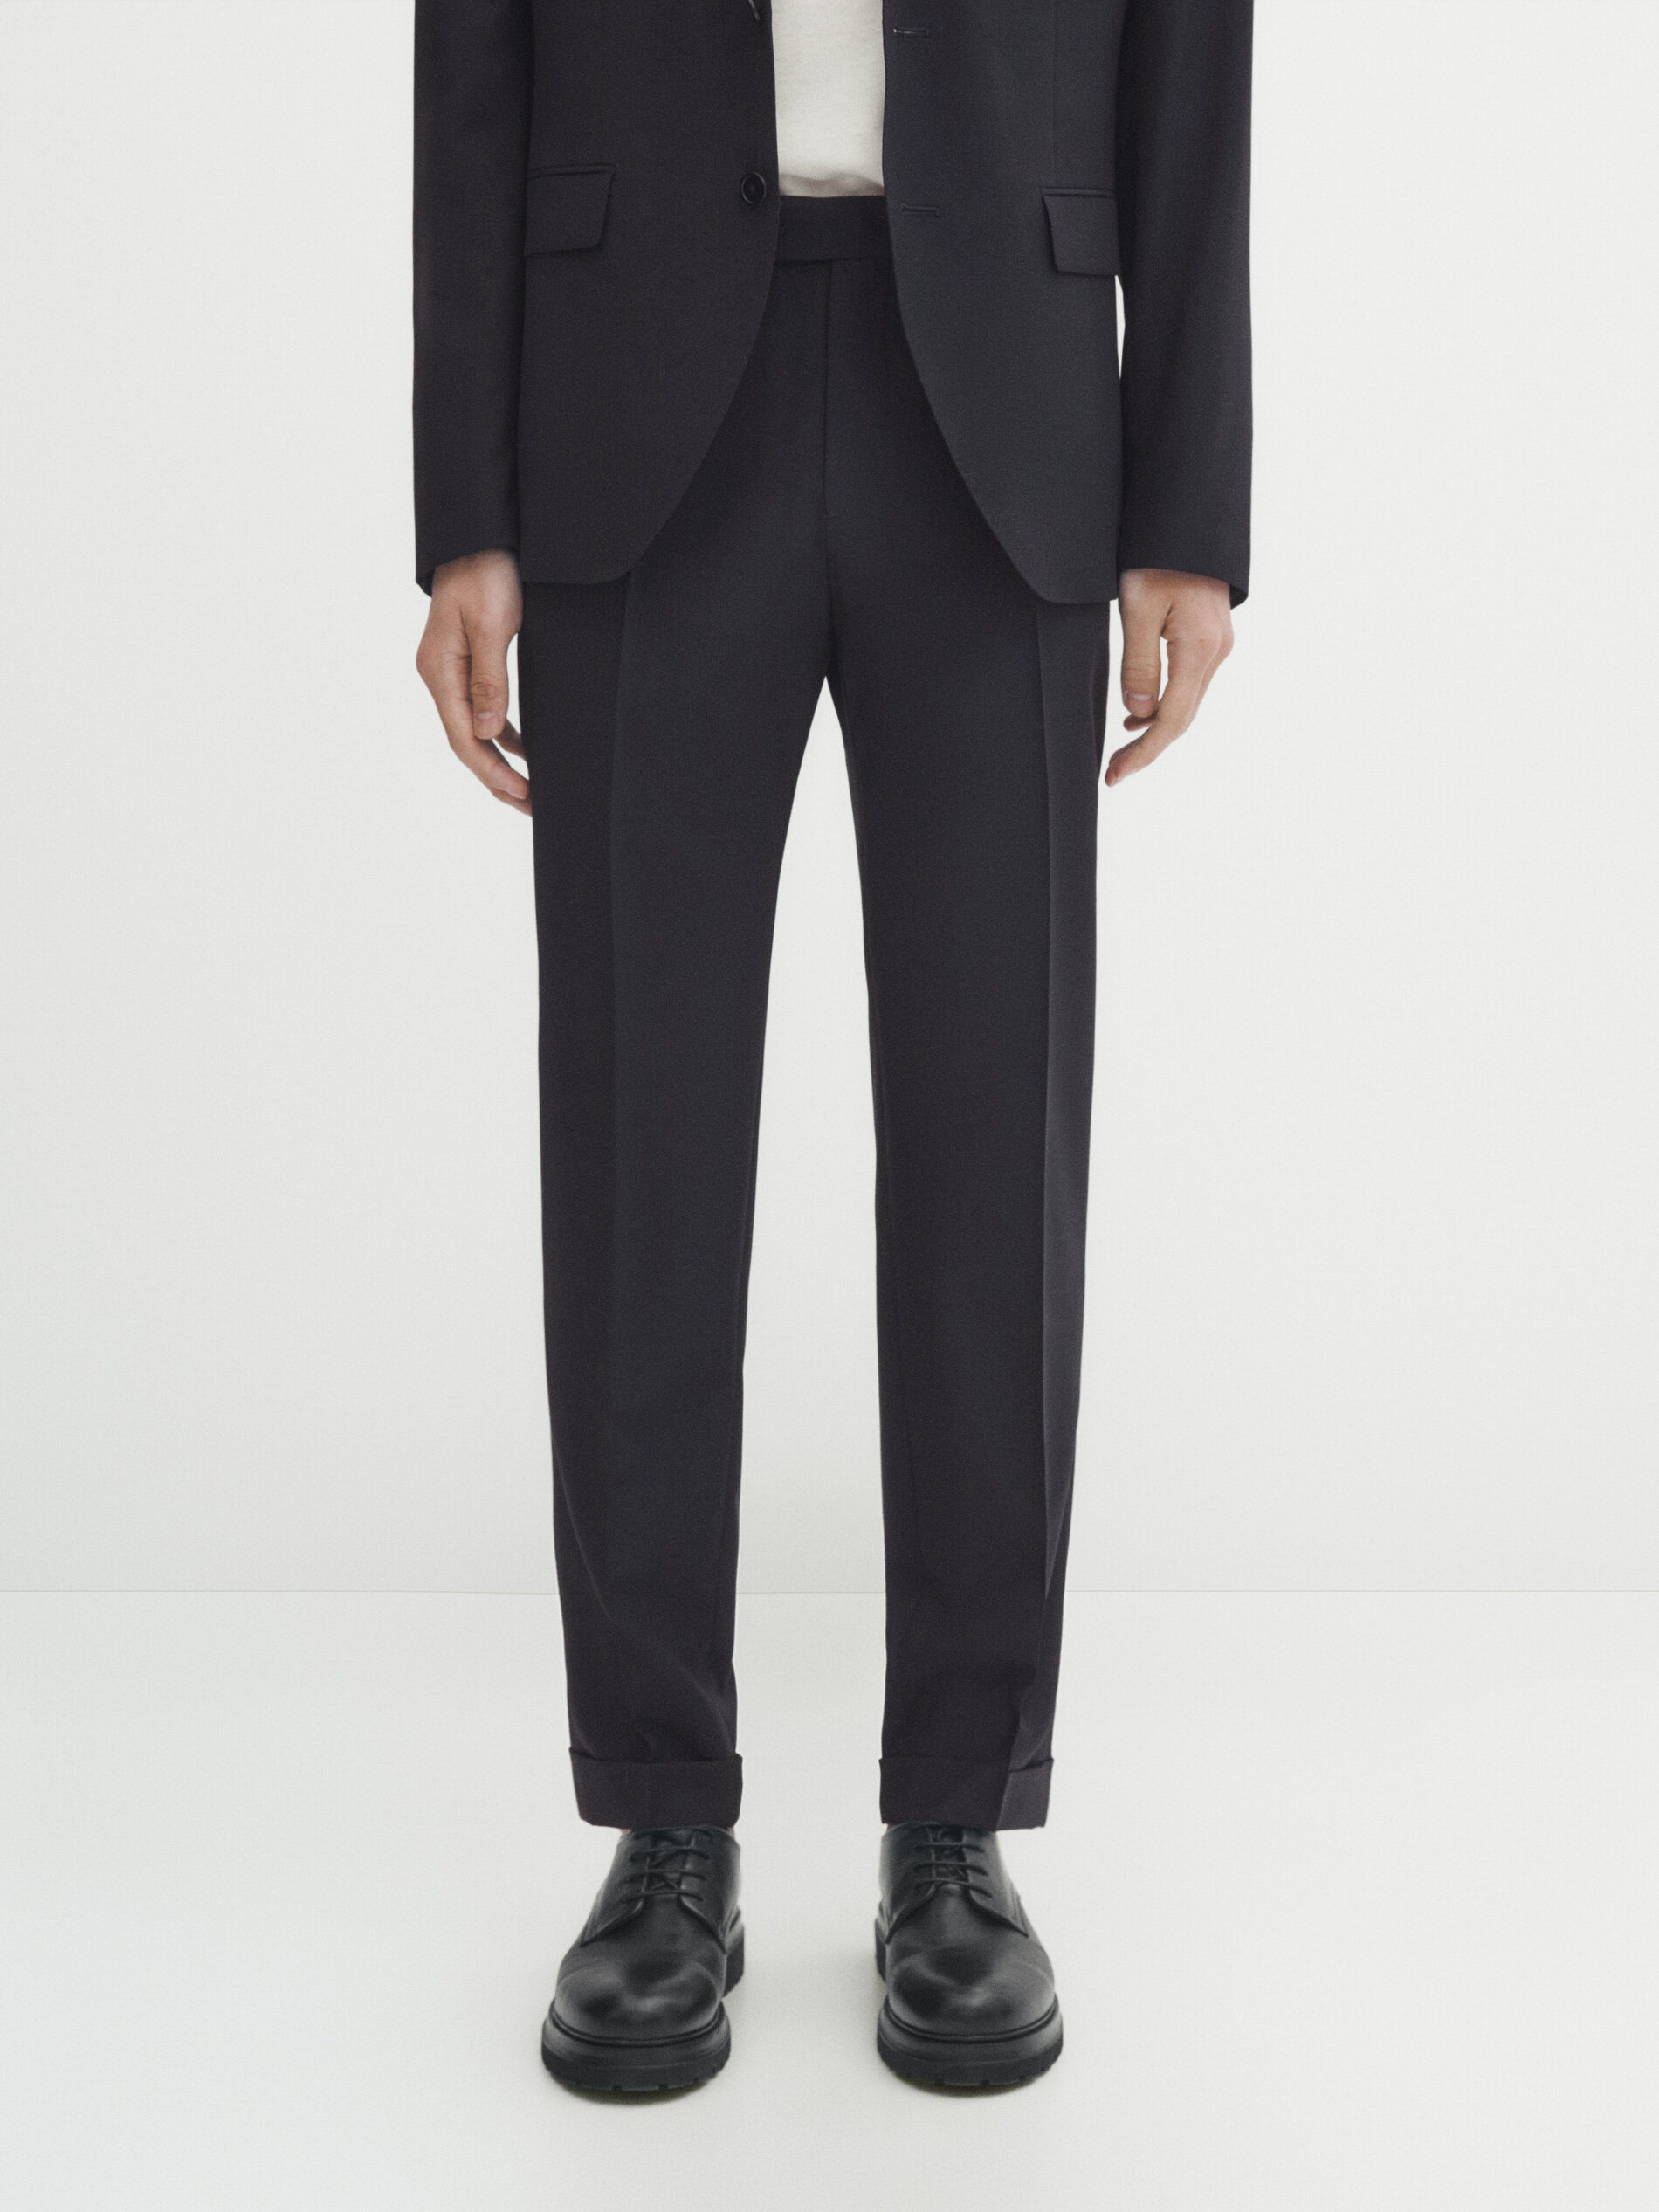 Petrol blue wool suit trousers with birdseye texture | Savile Row Co